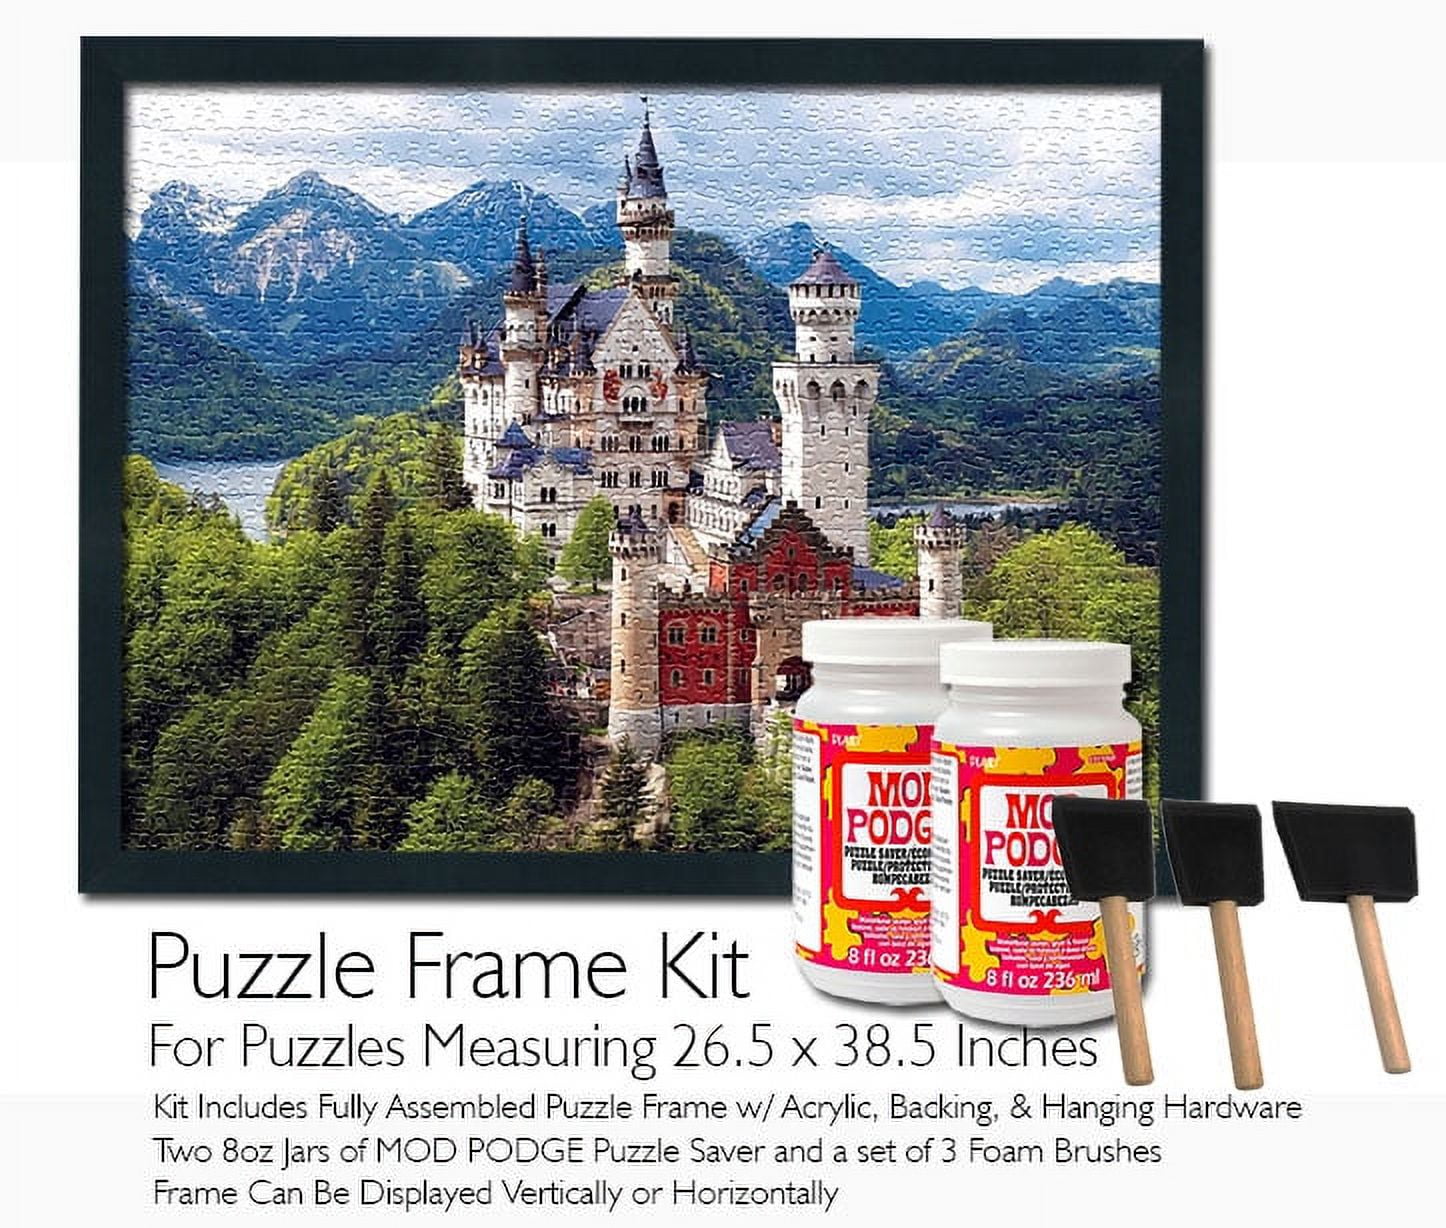 Mod Podge Jigsaw Puzzle Frame Kit - For Puzzles Measuring 26.5x38.5 inches  